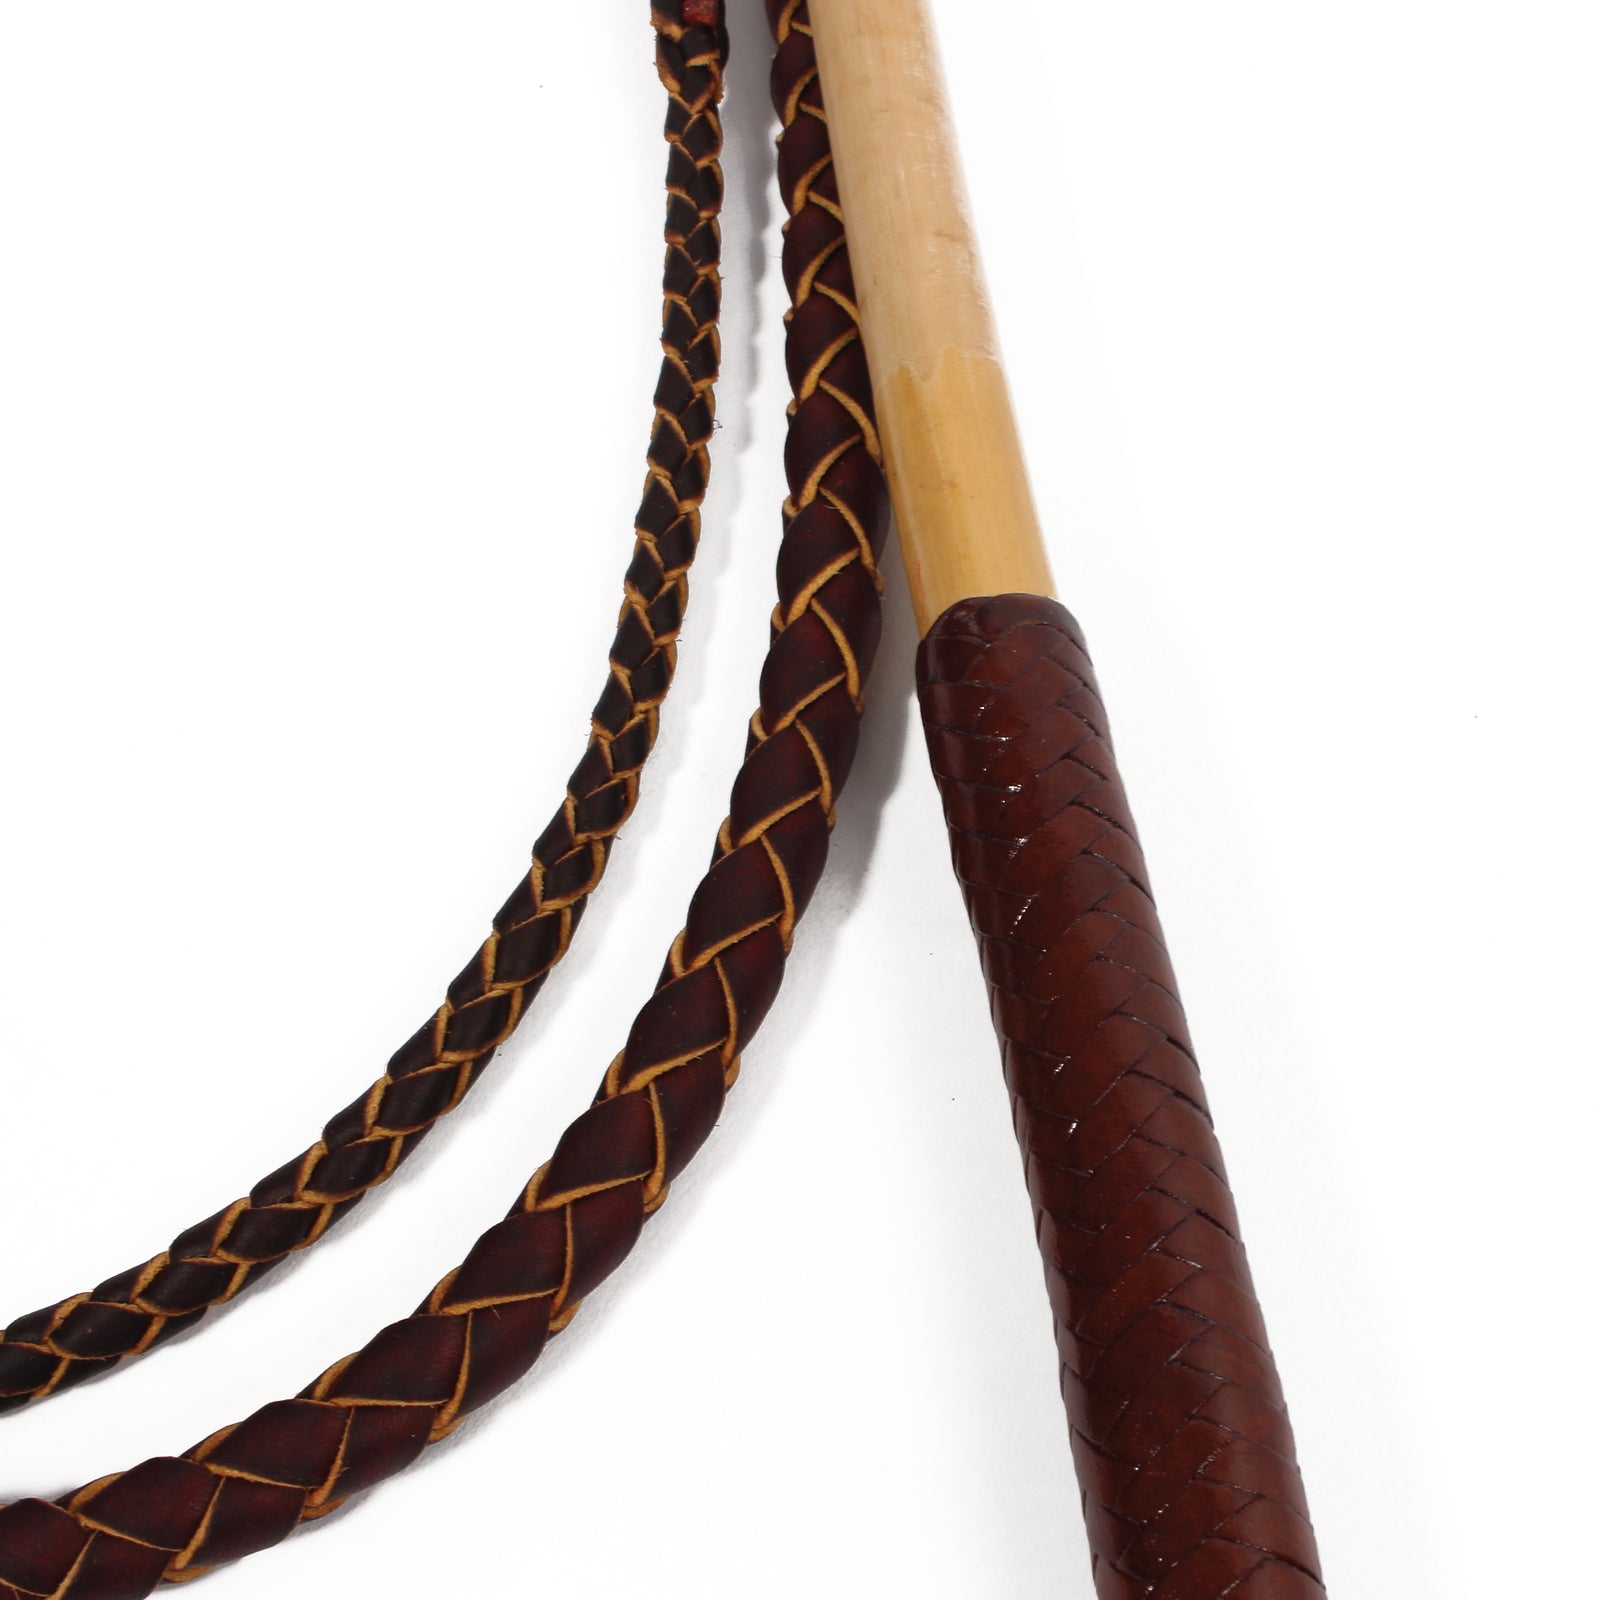 Australian Made 6ft Stockmans Whip - Red Hide